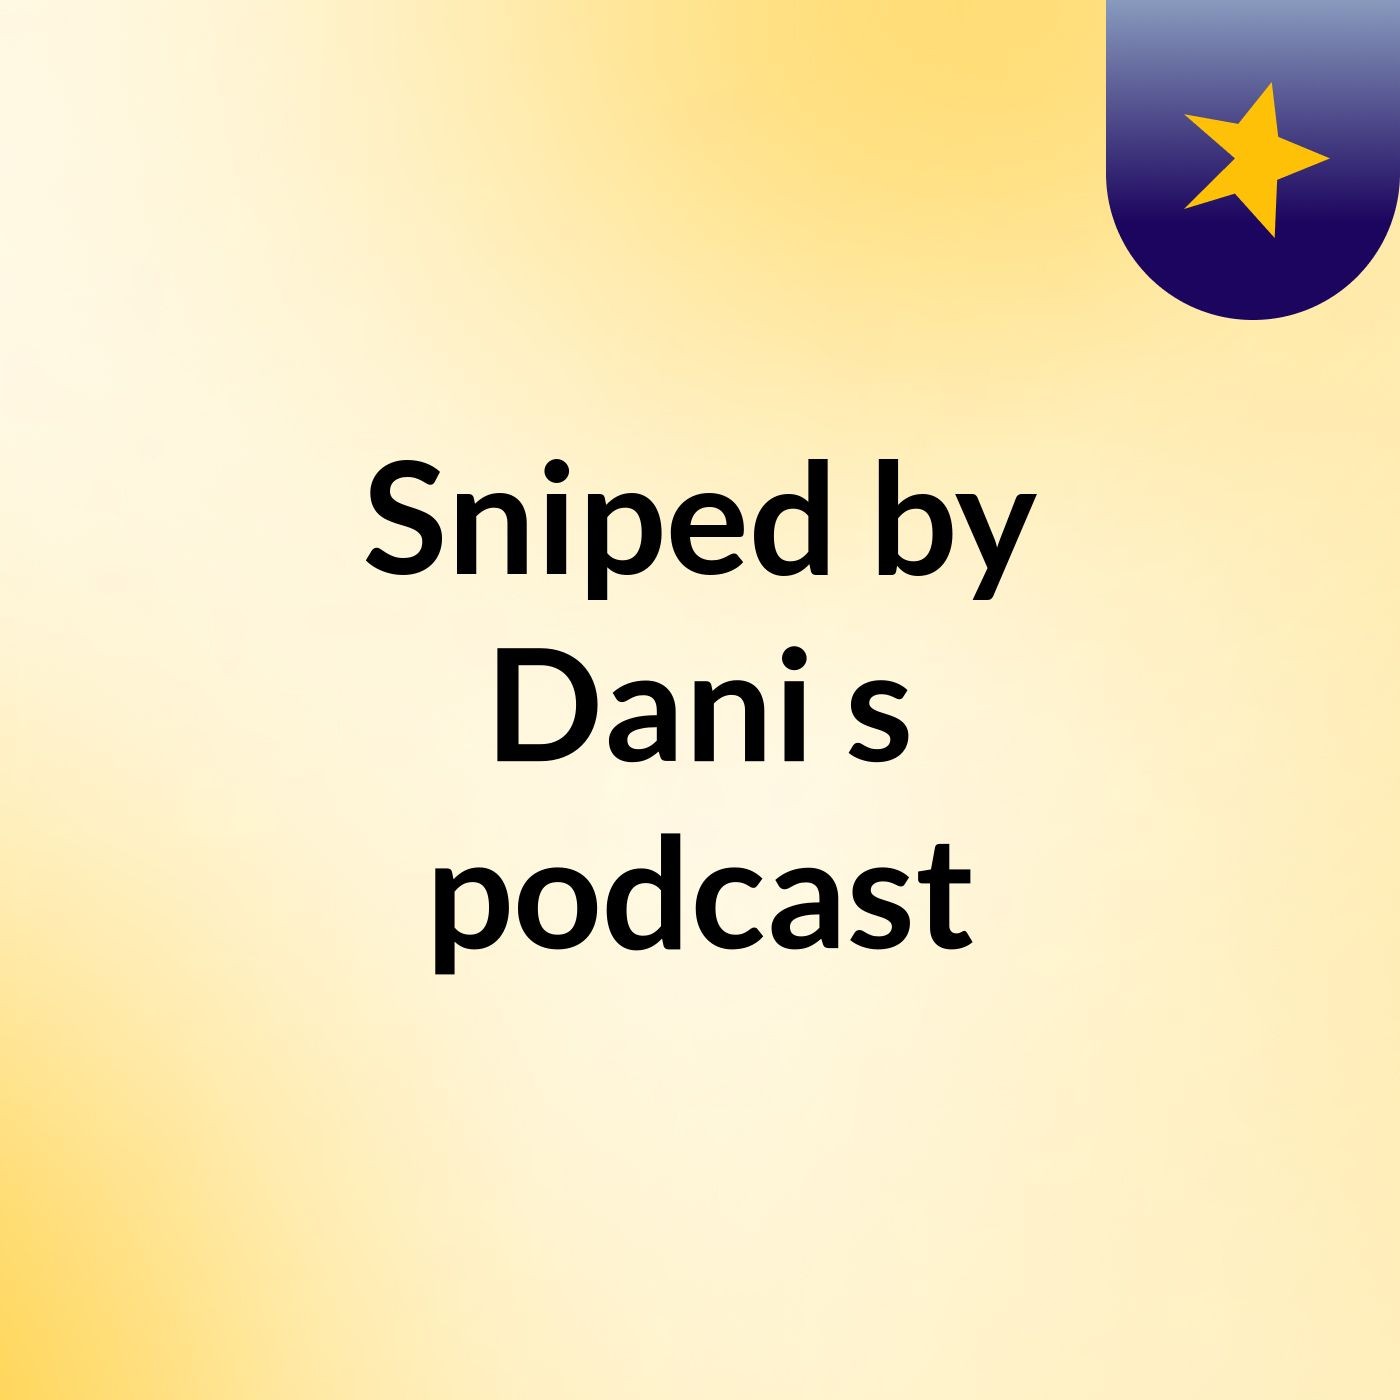 Sniped by Dani's podcast